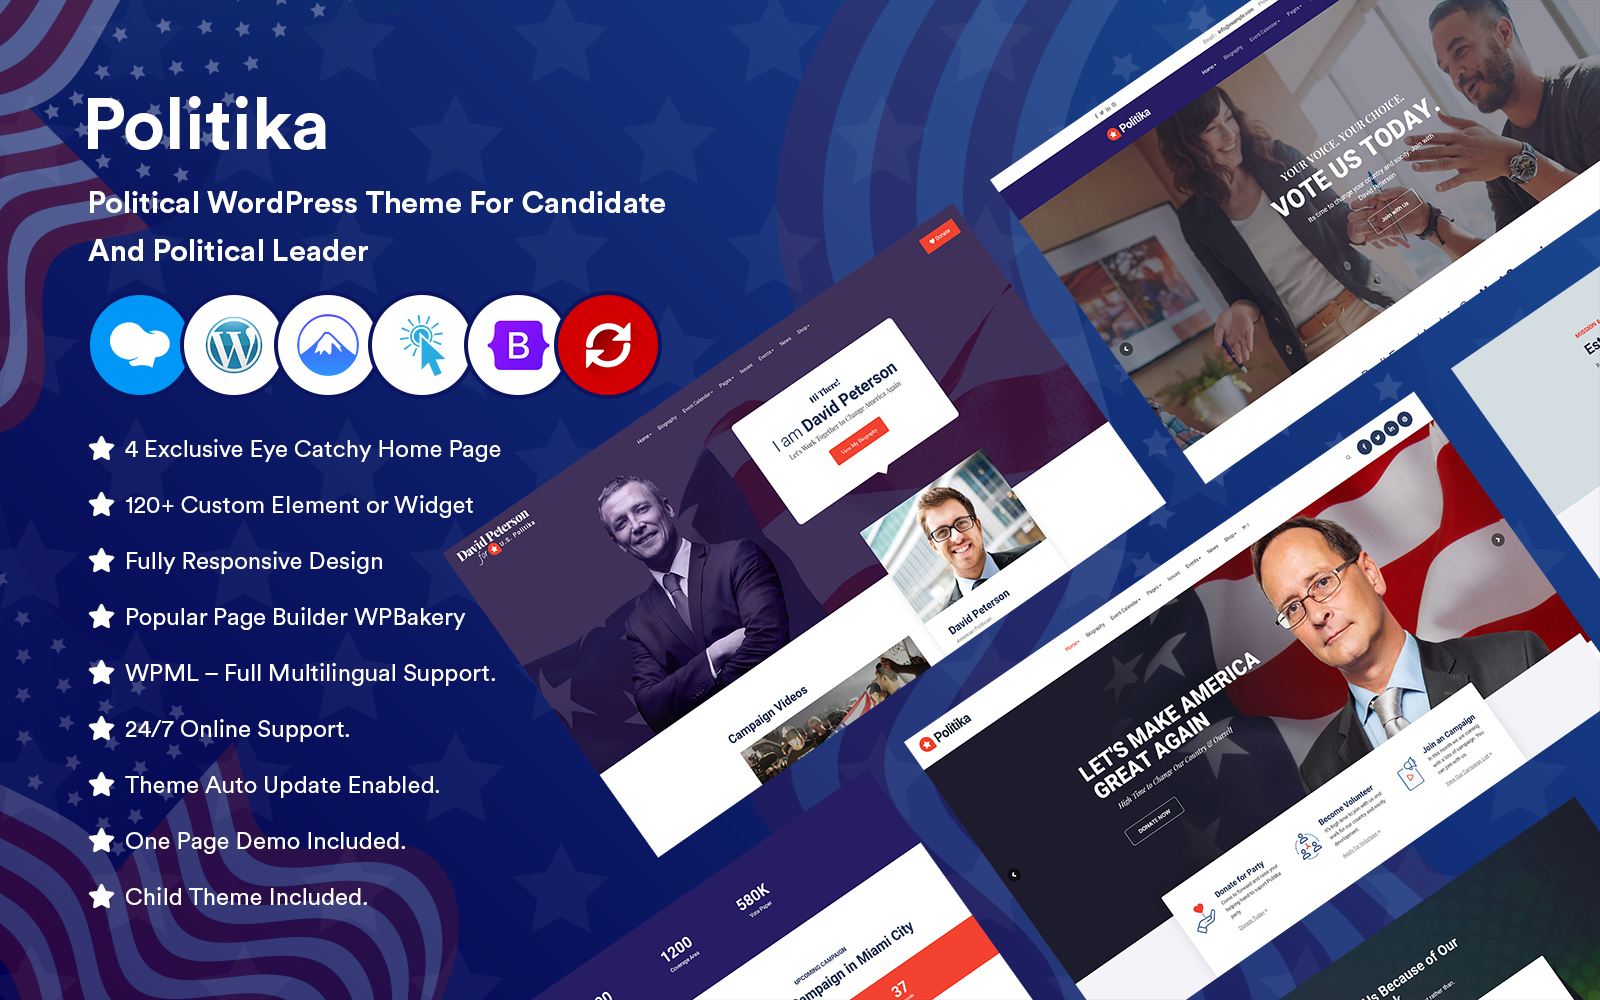 Kit Graphique #209557 Candidate Debate Web Design - Logo template Preview